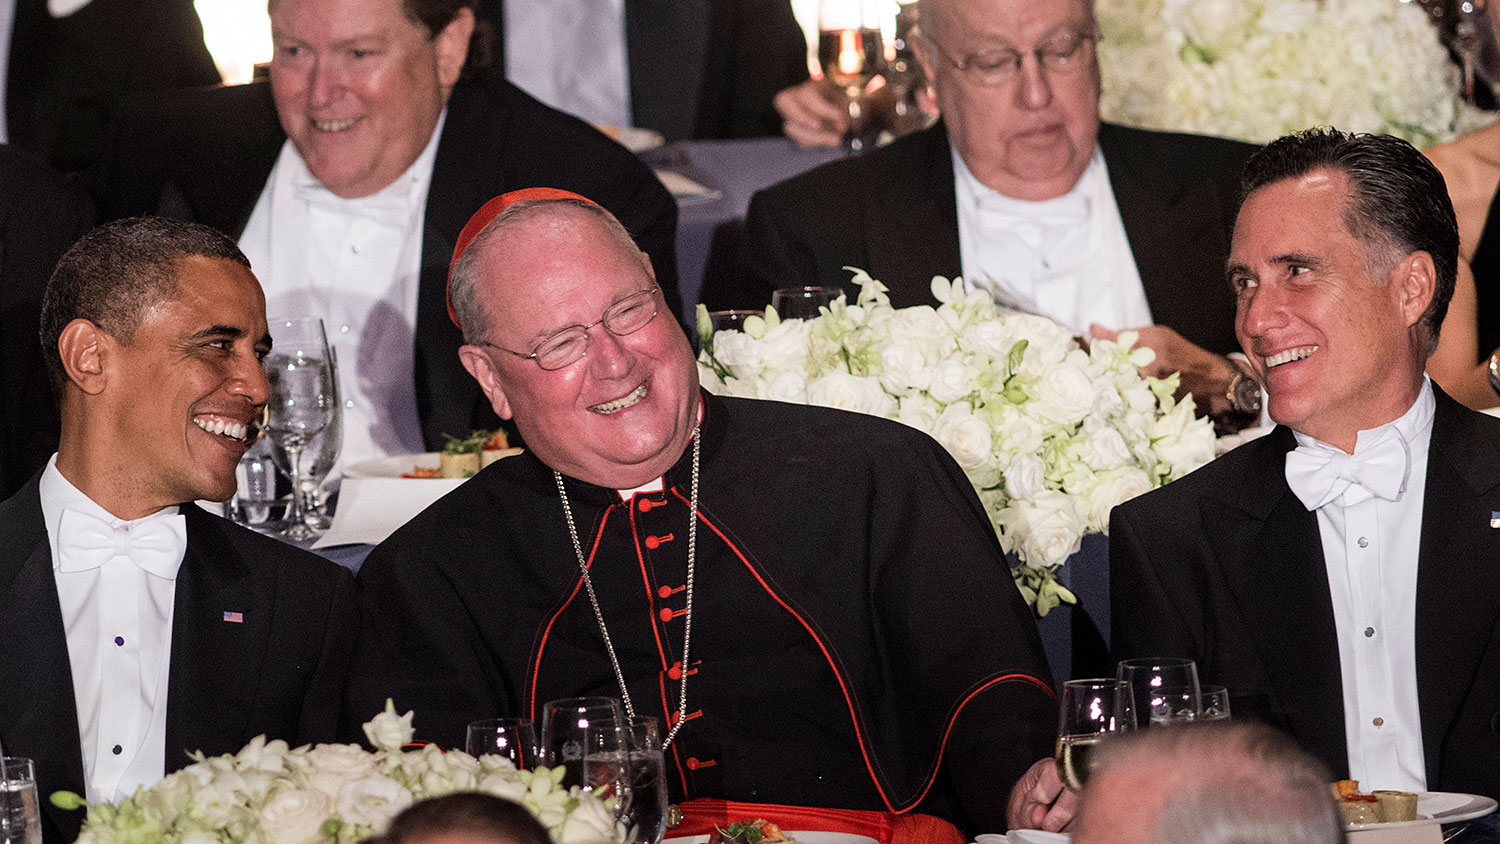 President Barack Obama, Cardinal Timothy Dolan, and Republican presidential candidate Mitt Romney attend the 67th annual Al Smith dinner at the Waldorf Astoria hotel Oct. 18, 2012, in New York, New York.
